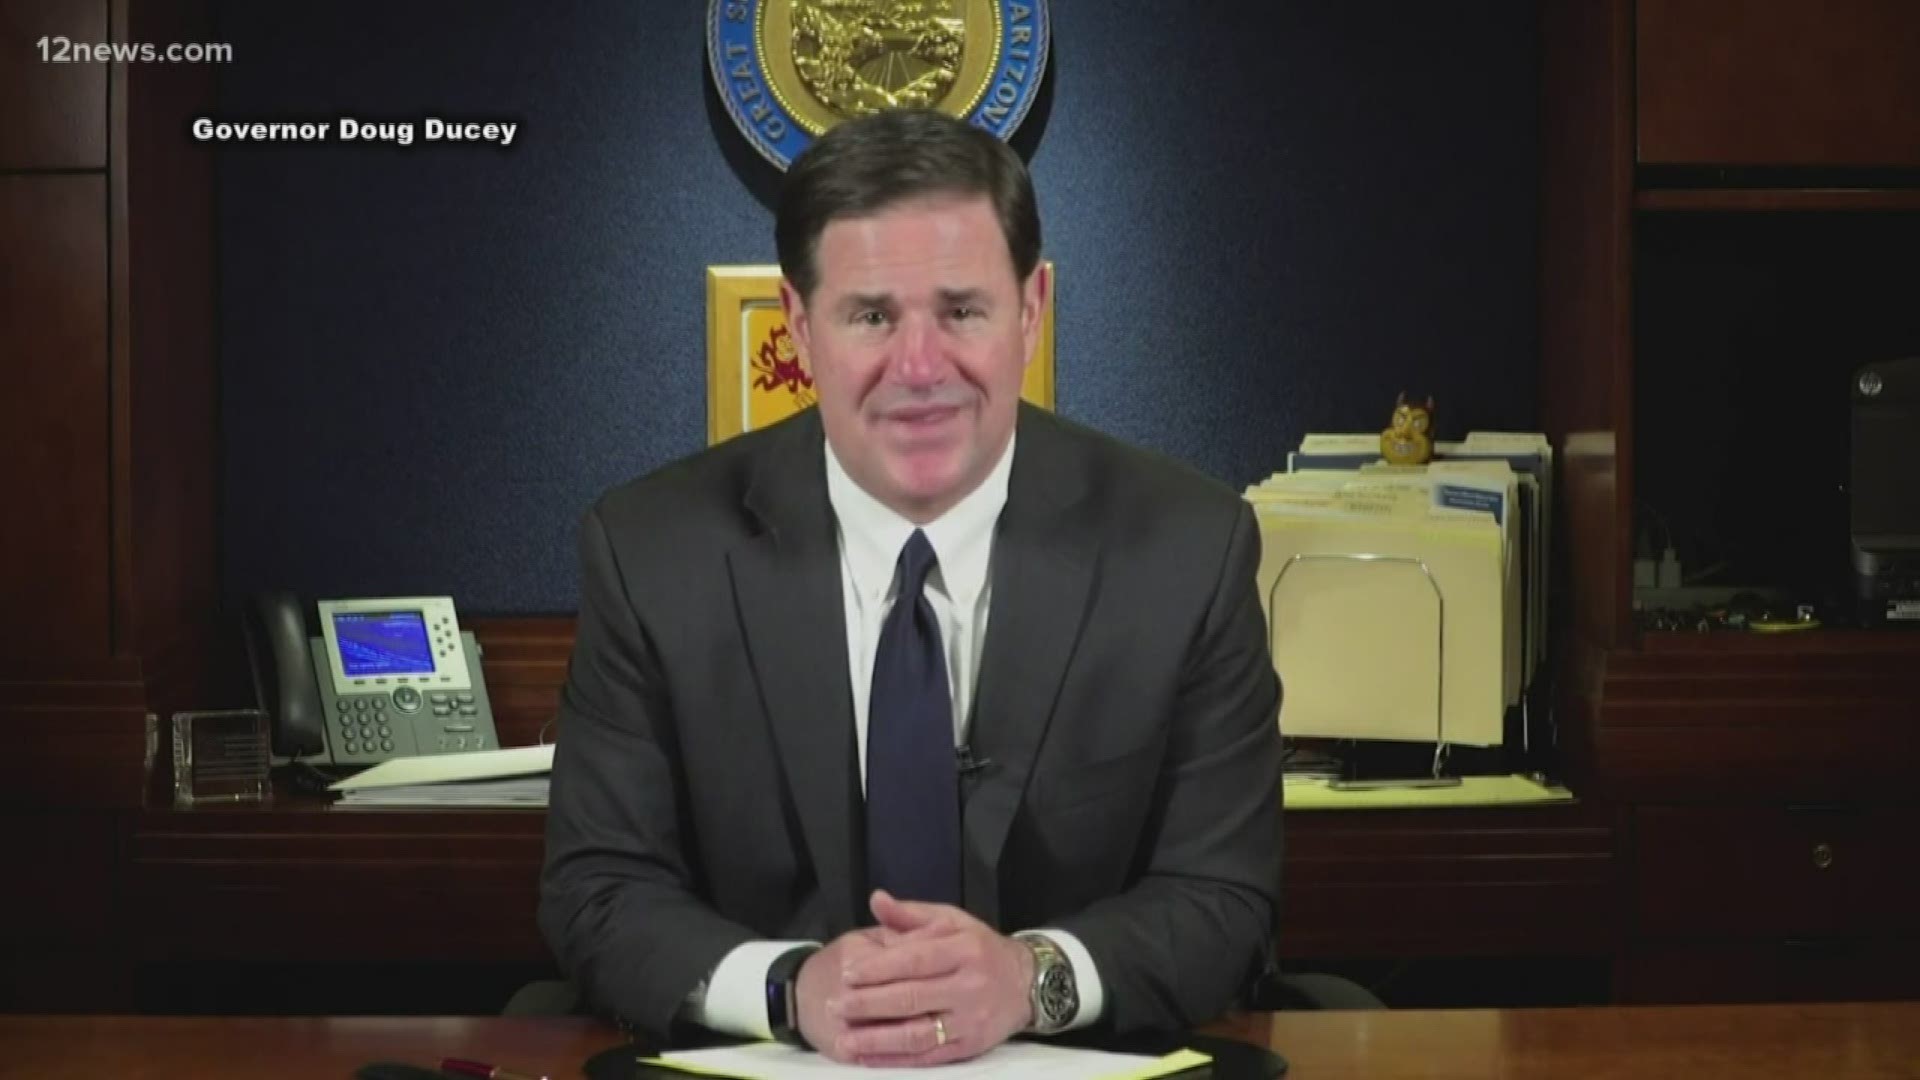 Governor Doug Ducey announced that Arizona has been awarded $1 million to expand mental health support and suicide prevention efforts in Arizona schools.